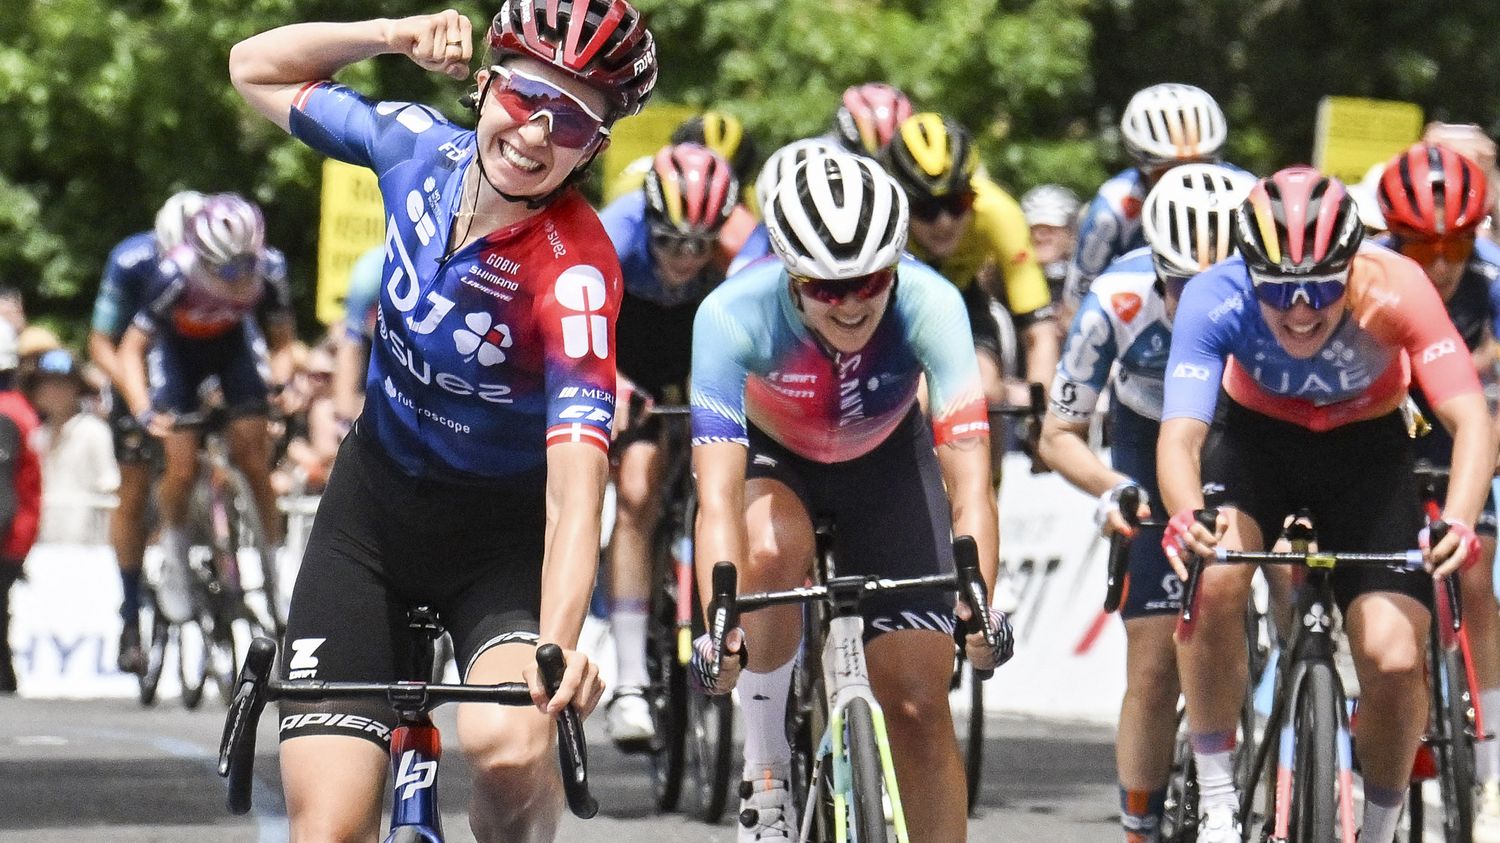 Cycling: "Don't ban anything"... Team FDJ-Suez wants to establish itself as the best team in the women's peloton